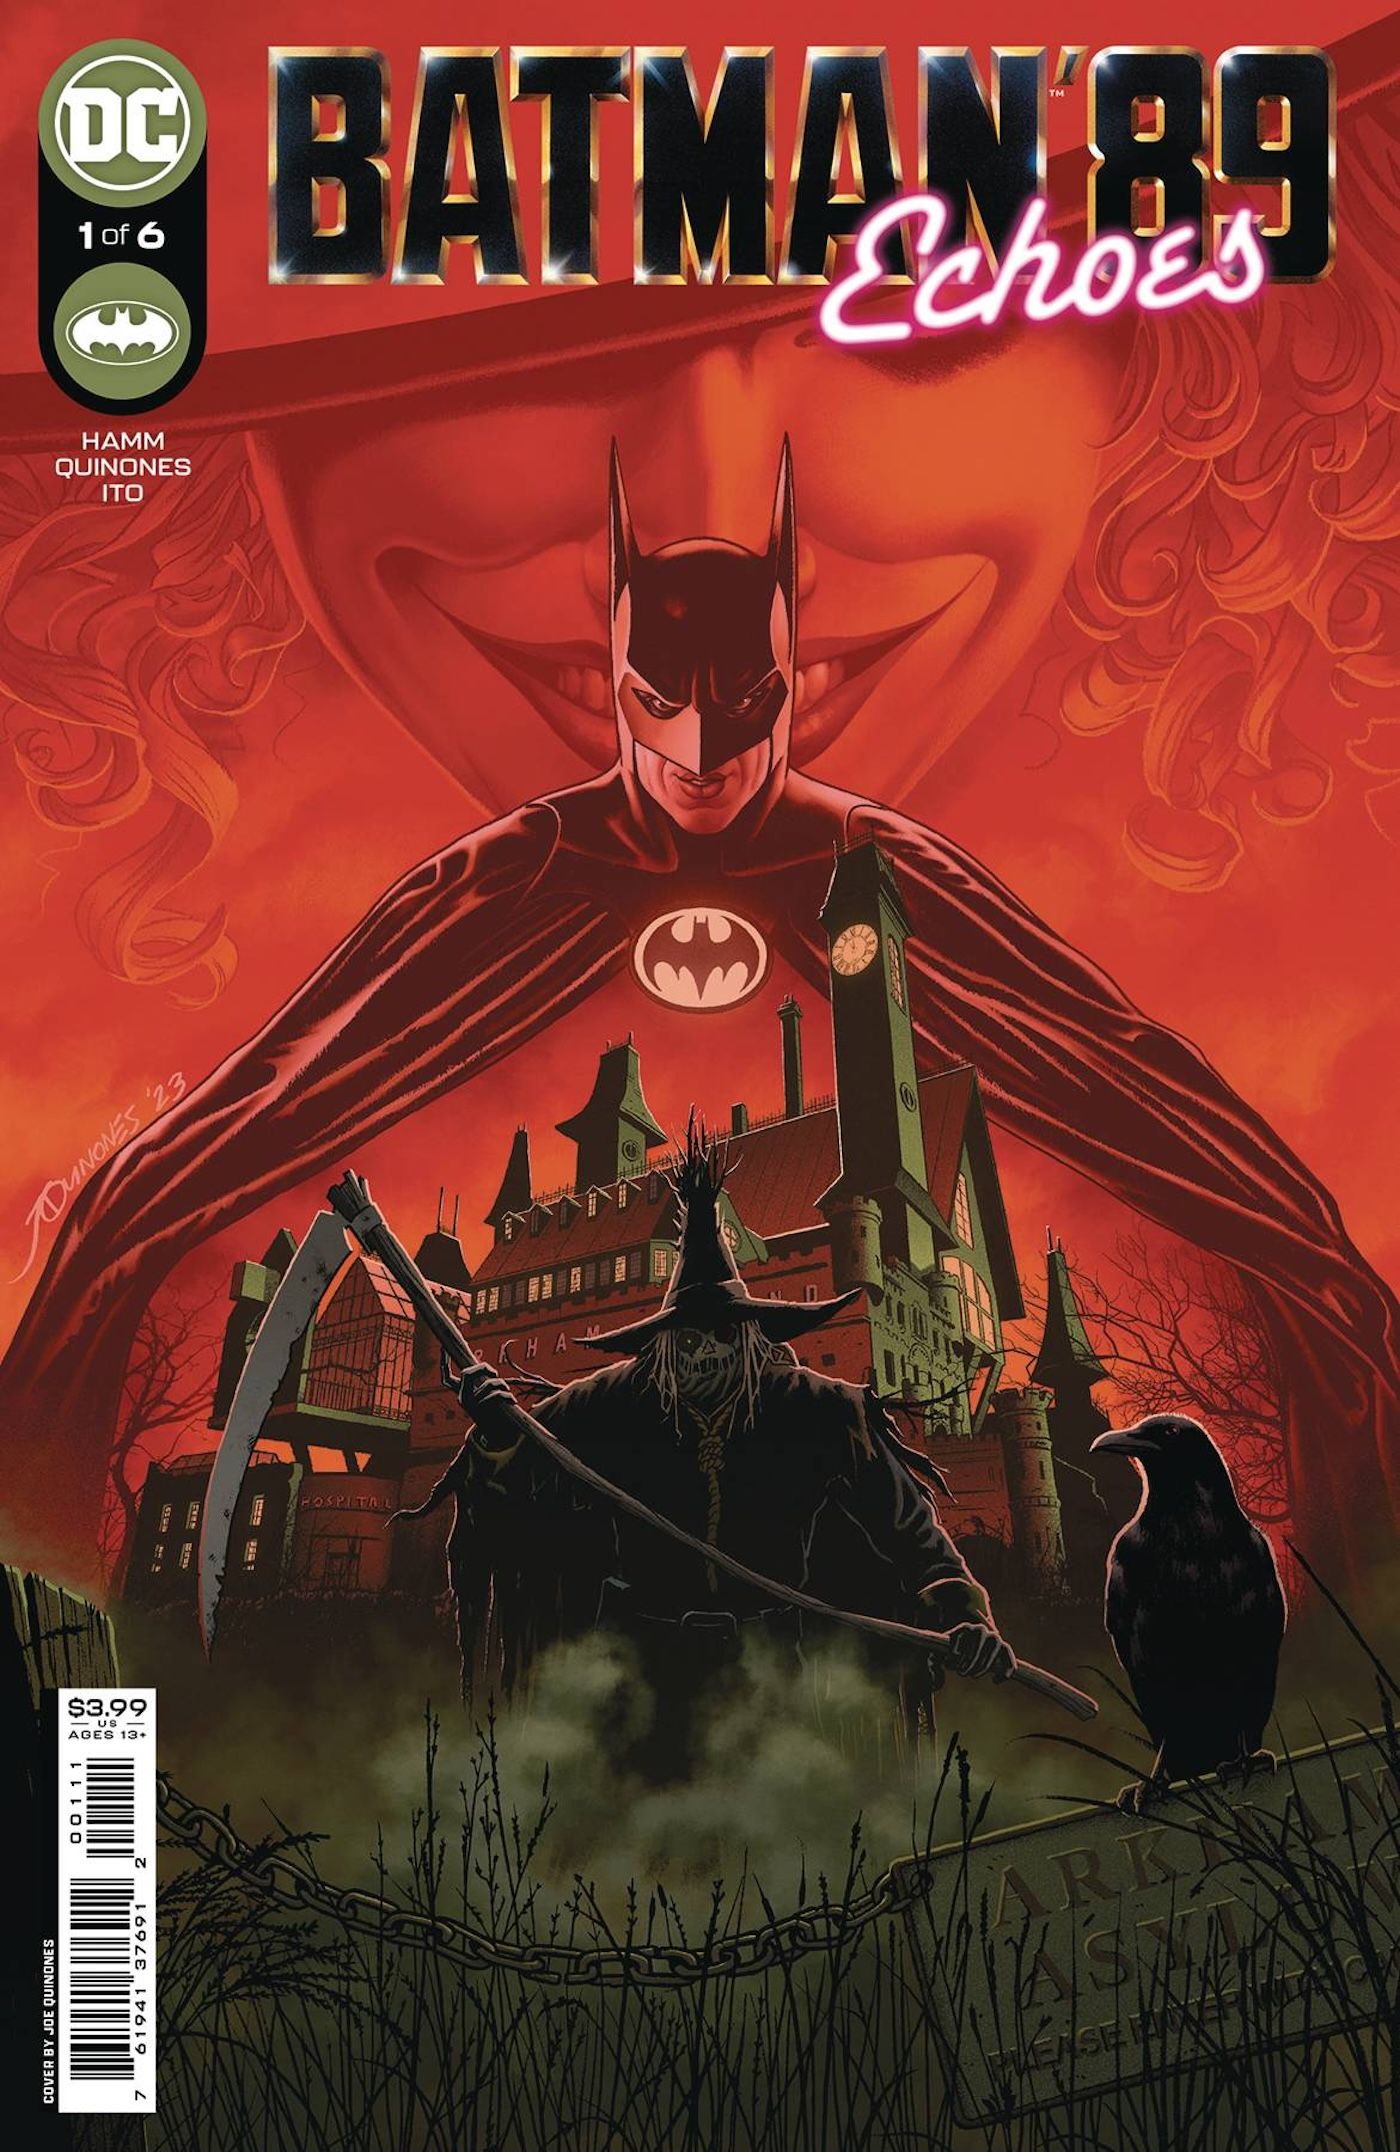 Batman 89 Echoes 1 Main Cover: Batman and Scarecrow with a red background.